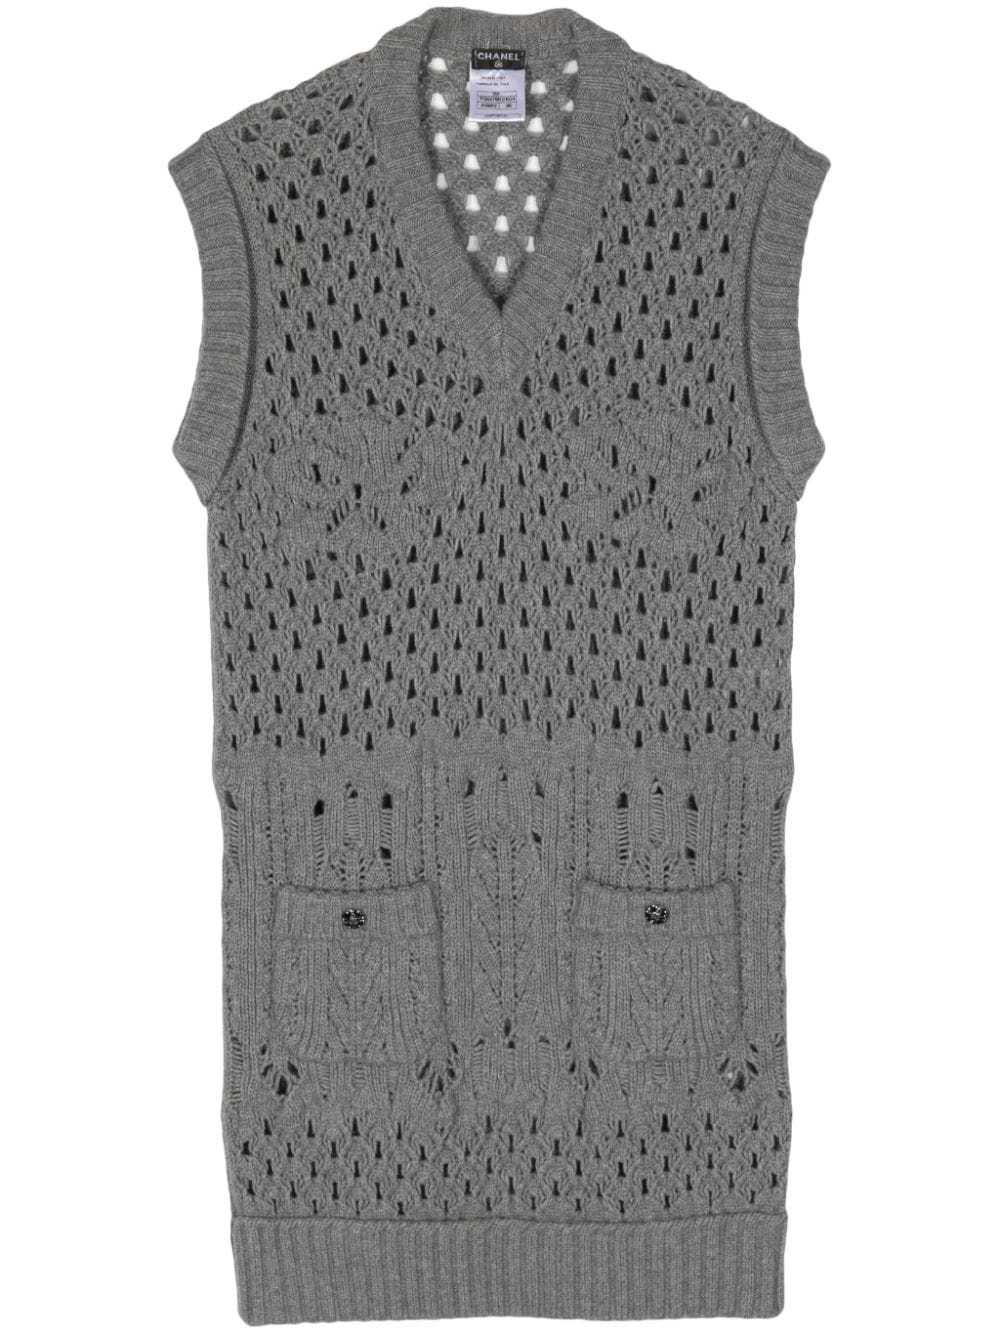 CHANEL Pre-Owned 2006 open-knit sleeveless minidr… - image 1